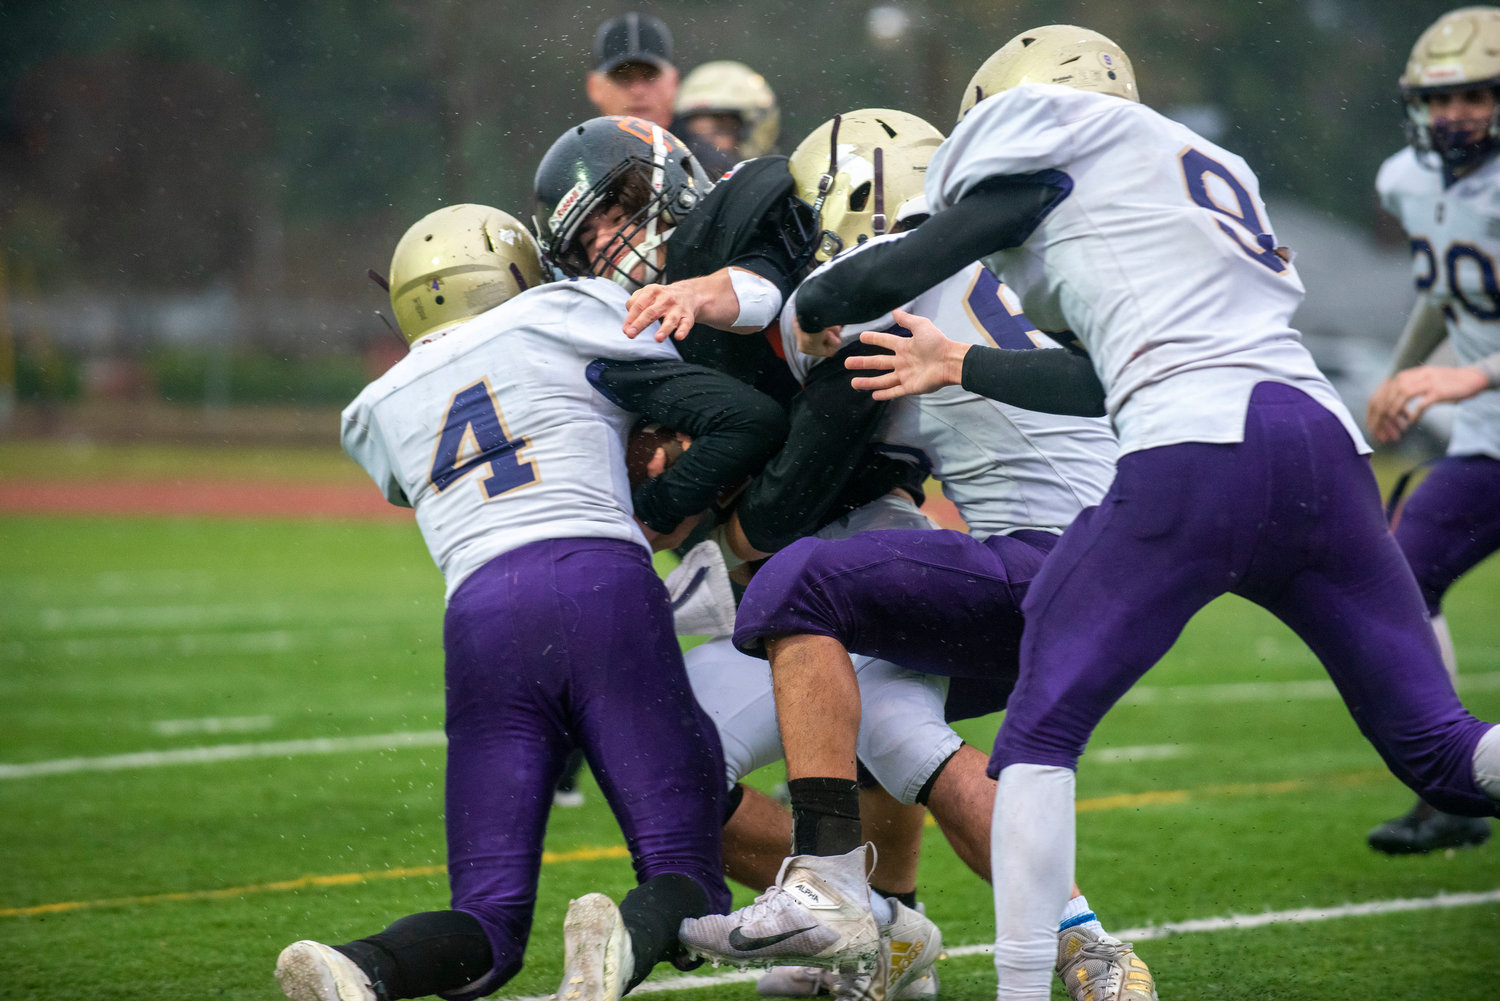 Onalaska defenders pile up on a Kalama ball carrier during the state semfinals Nov. 27.